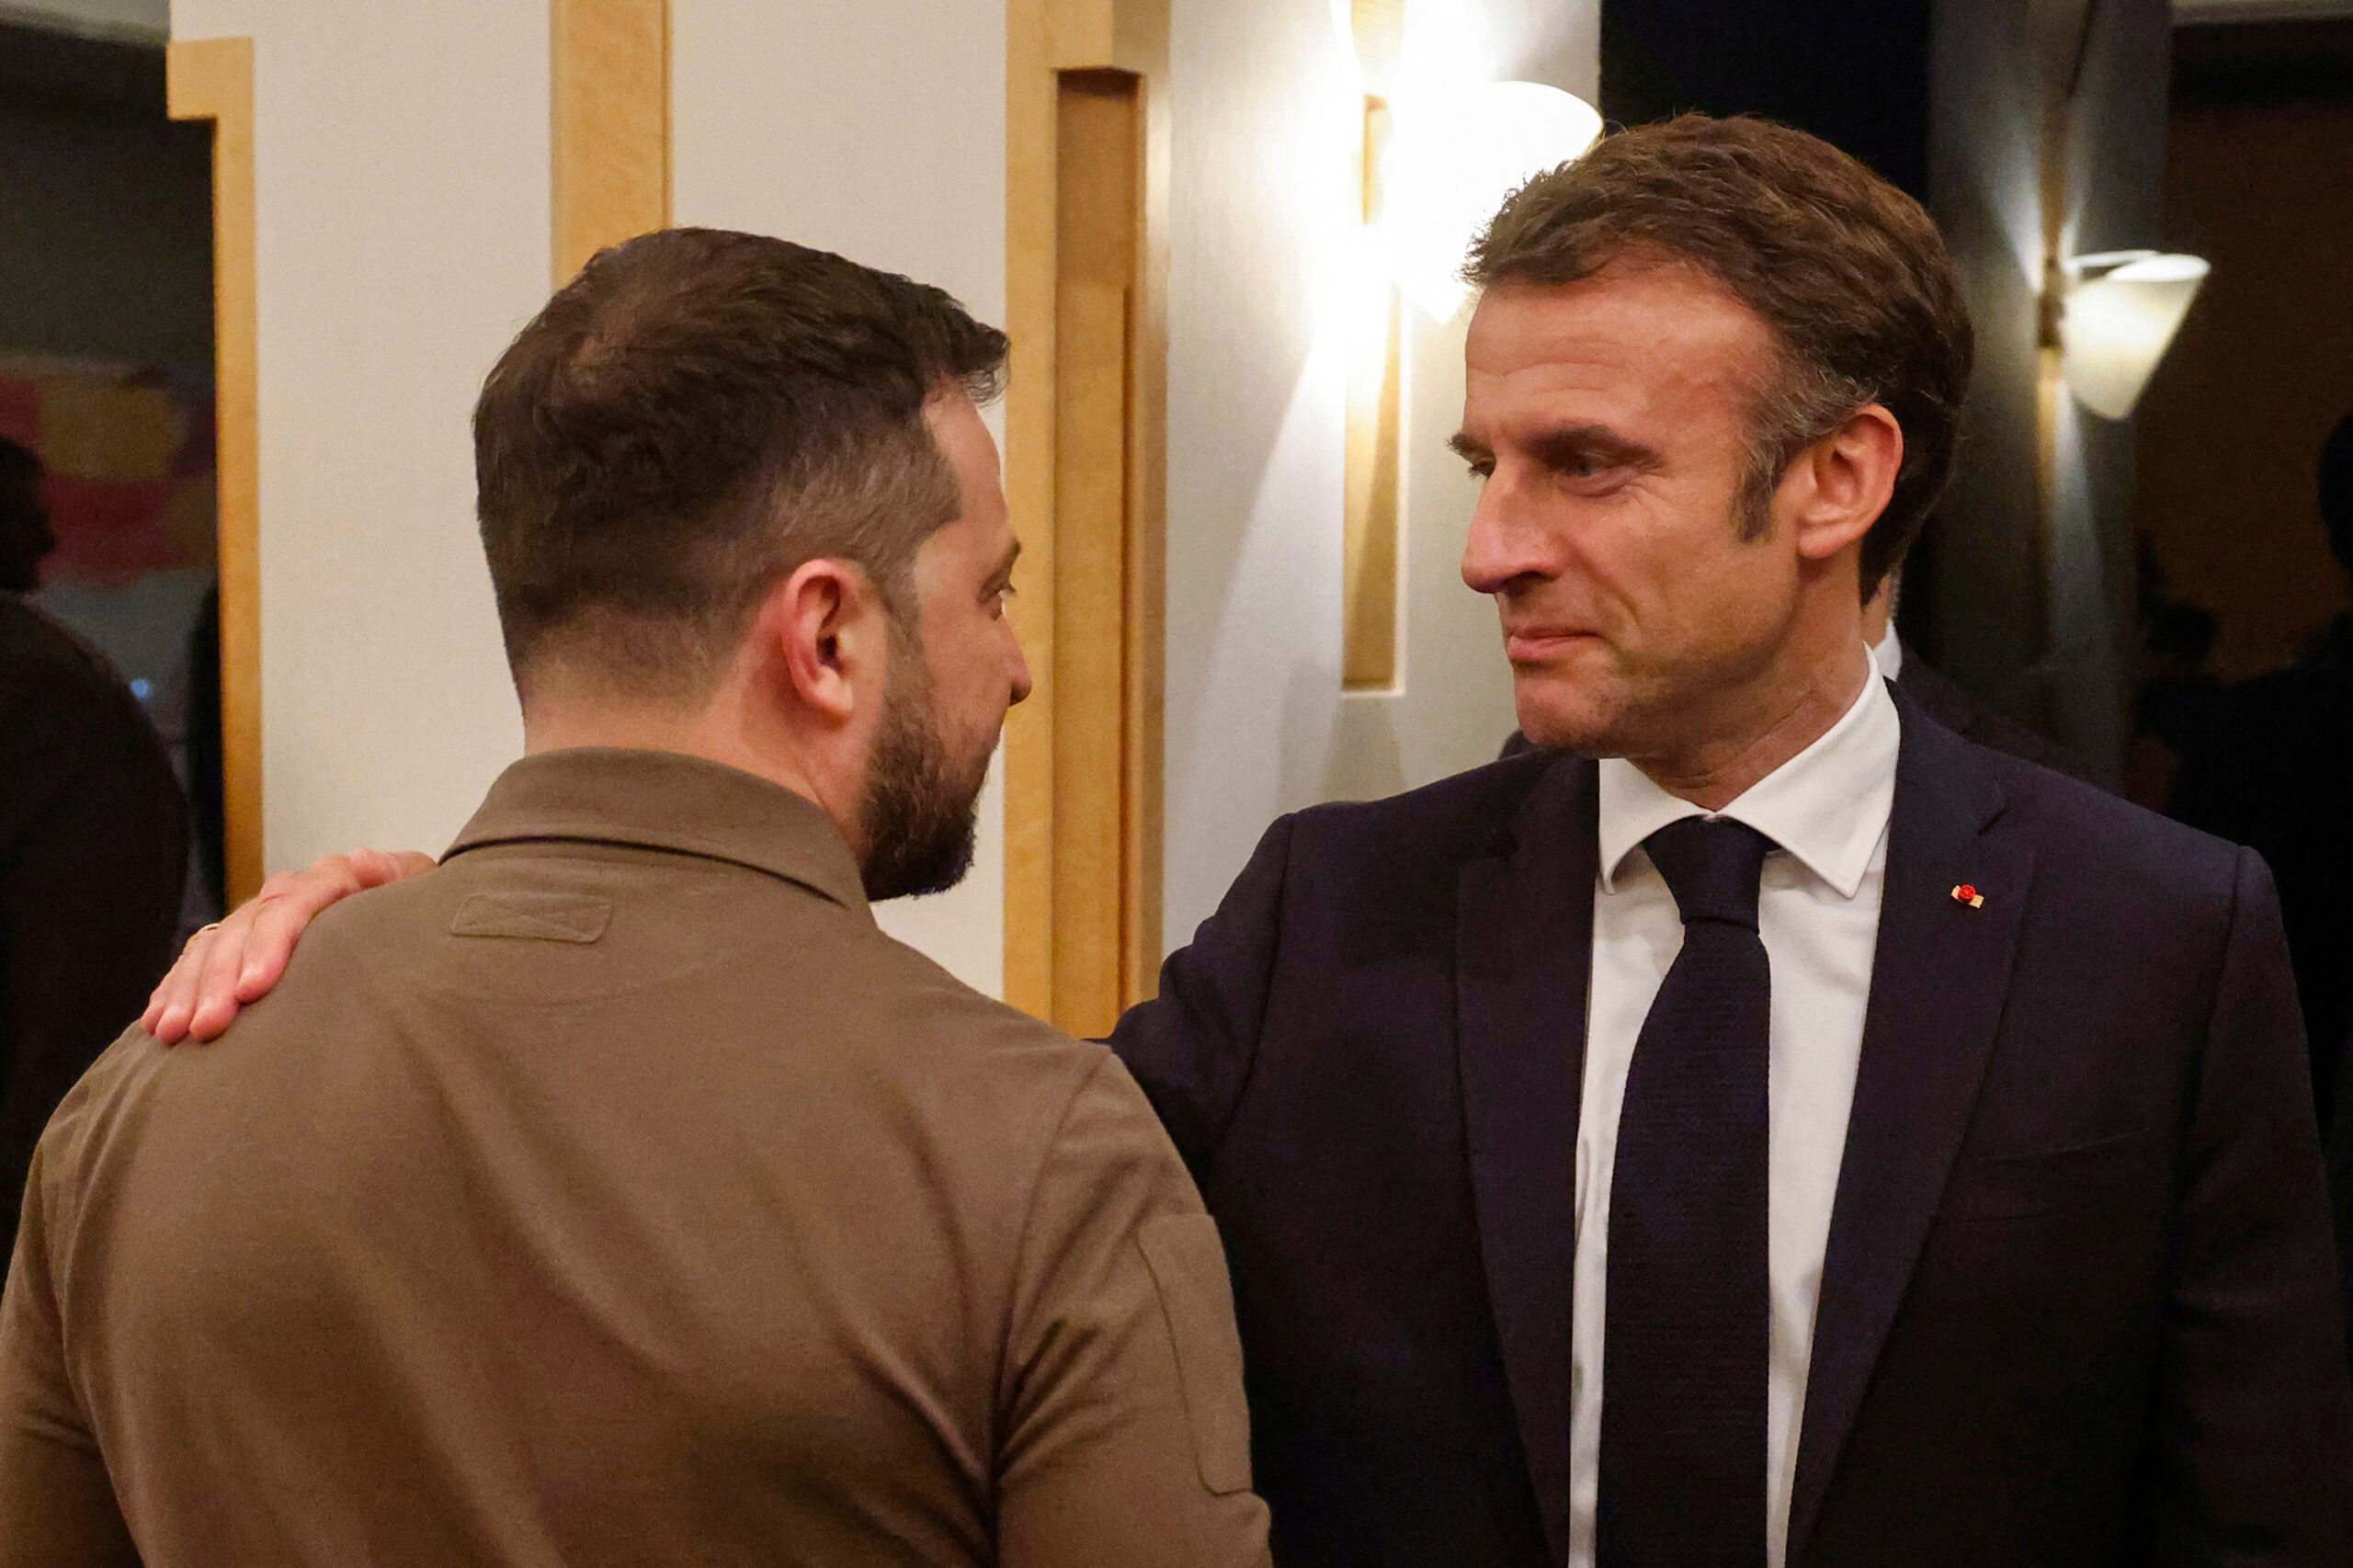 TOPSHOT - Ukraine's President Volodymyr Zelensky (L) speaks with France's President Emmanuel Macron during a bilateral meeting on the sidelines of the G7 Leaders' Summit in Hiroshima on May 20, 2023. (Photo by Ludovic MARIN / AFP) (Photo by LUDOVIC MARIN/AFP via Getty Images)

Ukrainian President Volodymyr Zelensky meets with French President Emmanuel Macron in Hiroshima on May 20. Ludovic Marin/AFP/Getty Images